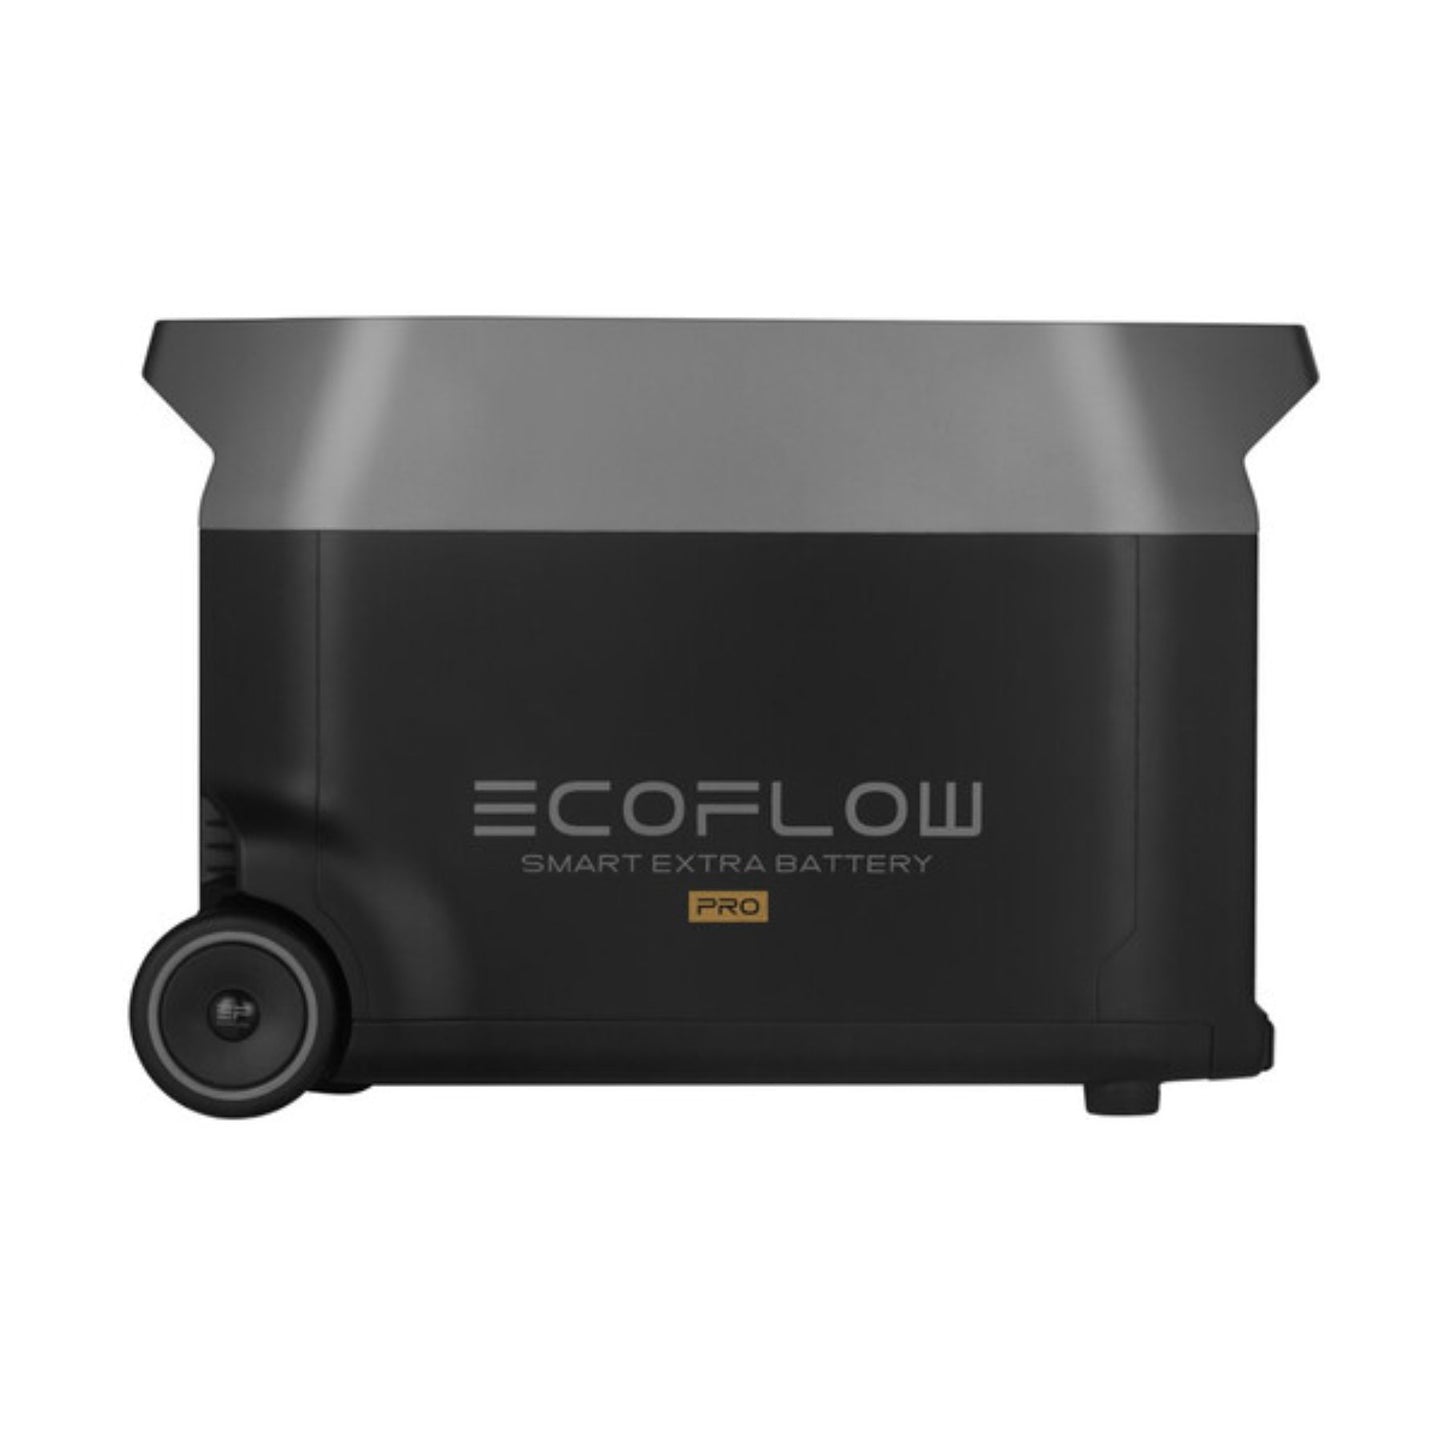 EcoFlow Smart Extra Battery for DELTA Pro Power Station